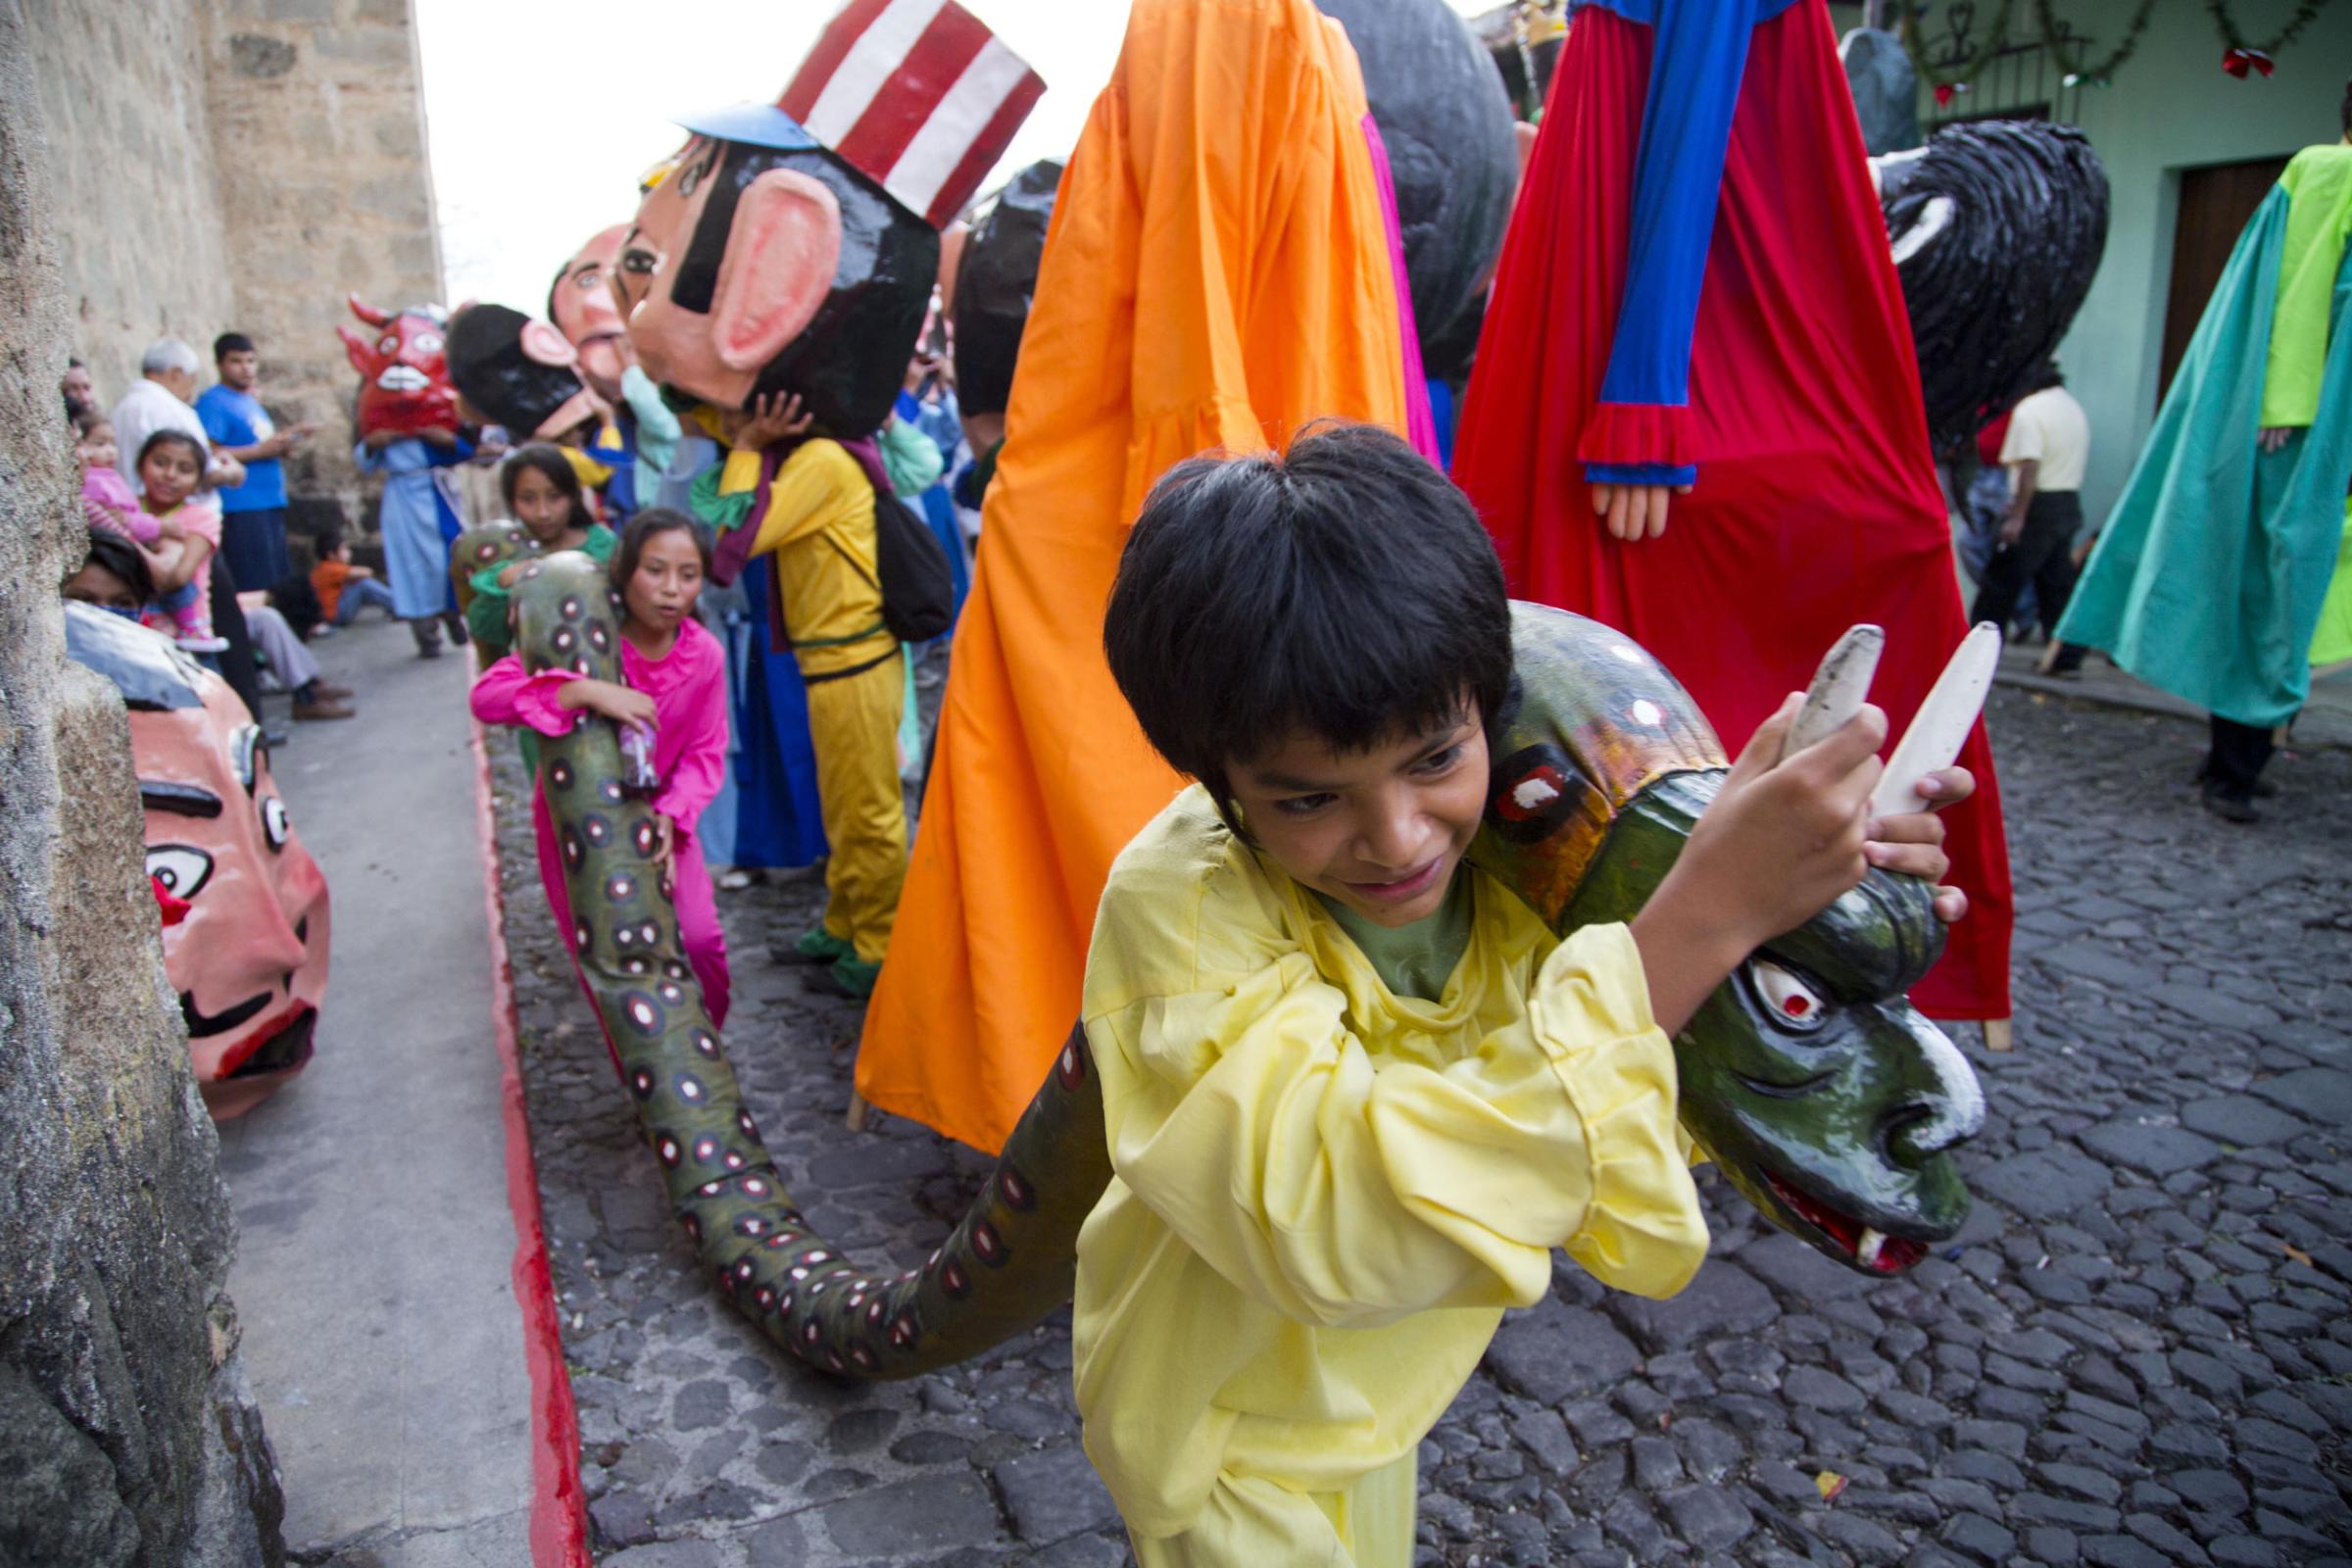 Children carry a snake made out of rags and paper mache as they take part in the traditional dance of "Los Gigantes," or "The Giants," during Christmas celebrations on Christmas Eve in Antigua Guatemala on Dec. 24, 2014.